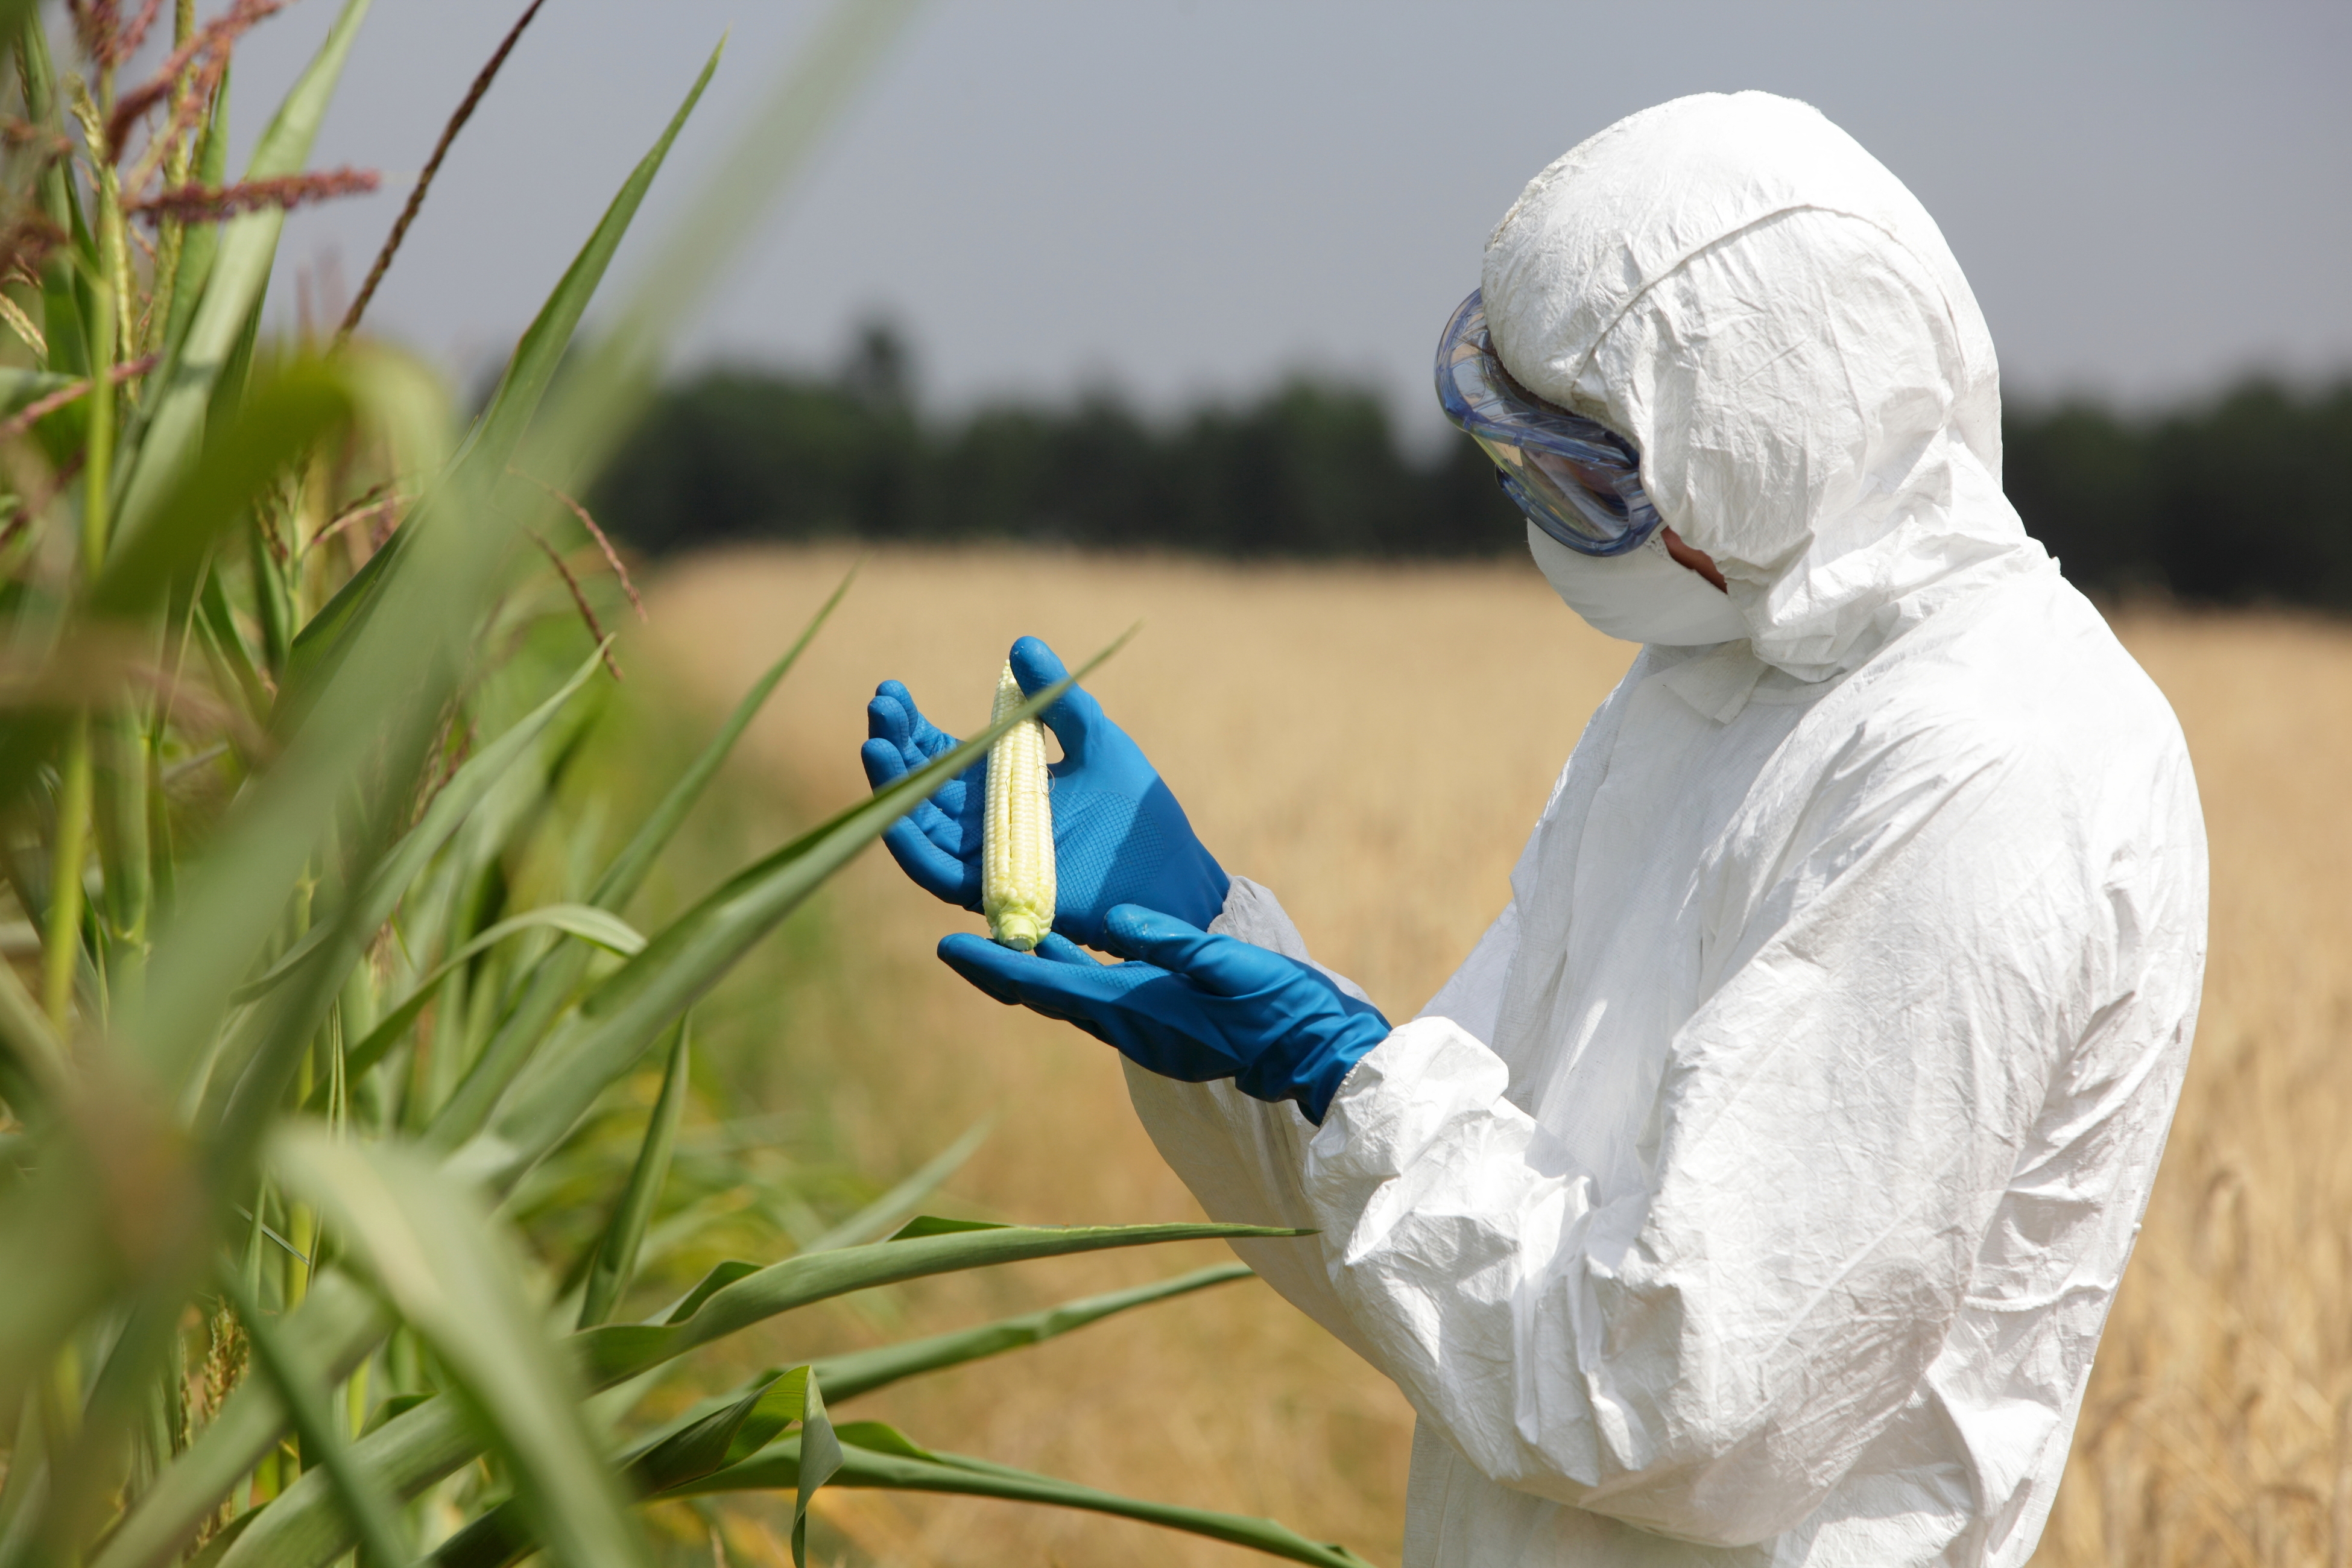 A person suited in bioharzard gear, examines a sample of corn in a field.